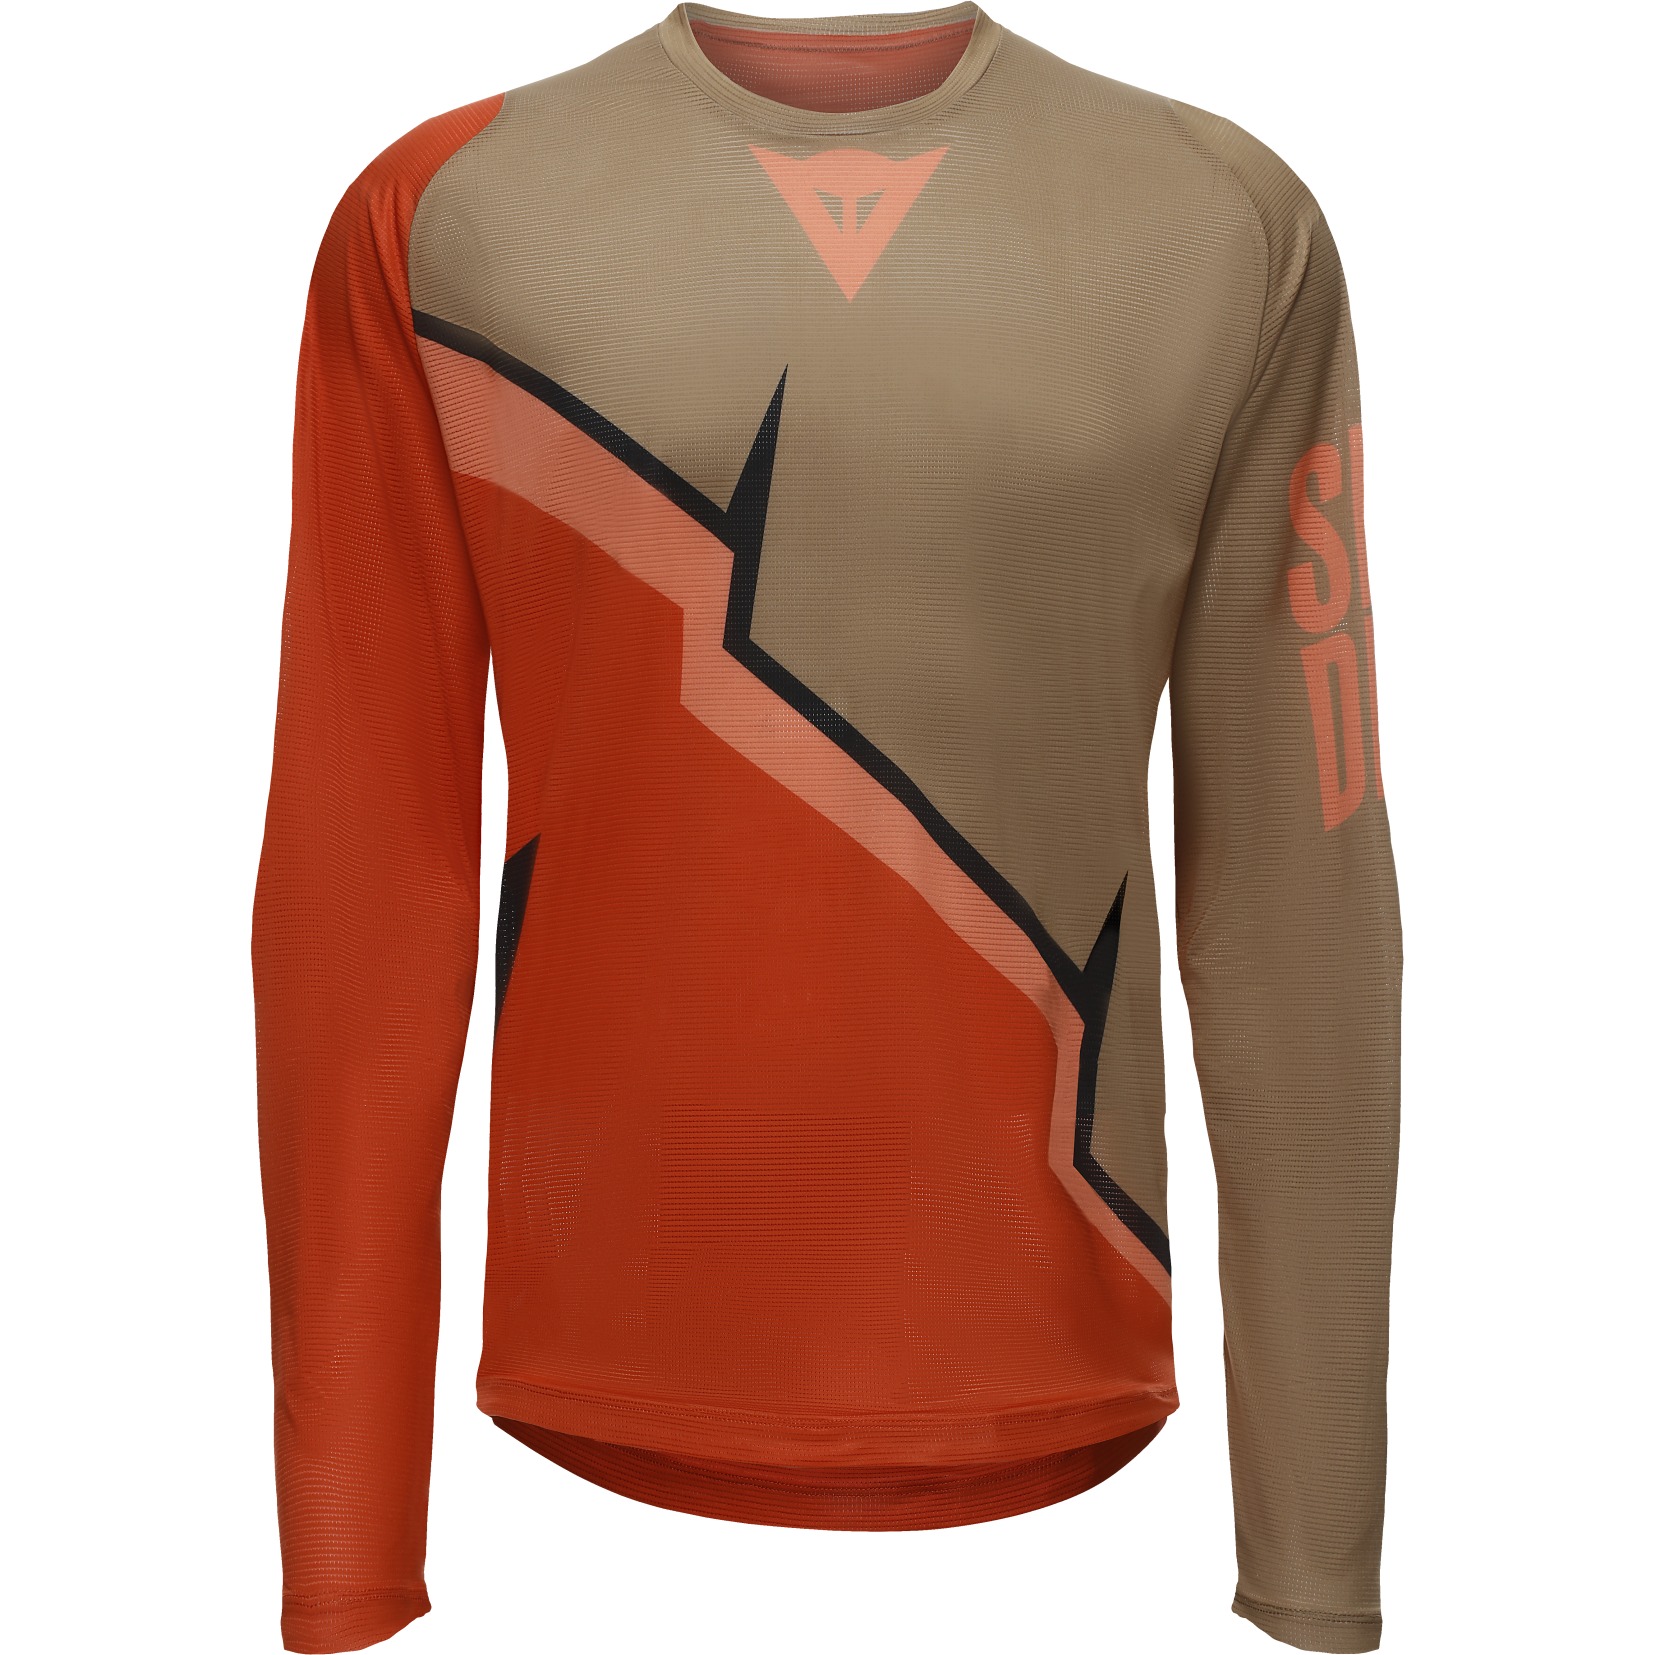 Picture of Dainese HgAER Longsleeve Jersey Men - red/brown/black